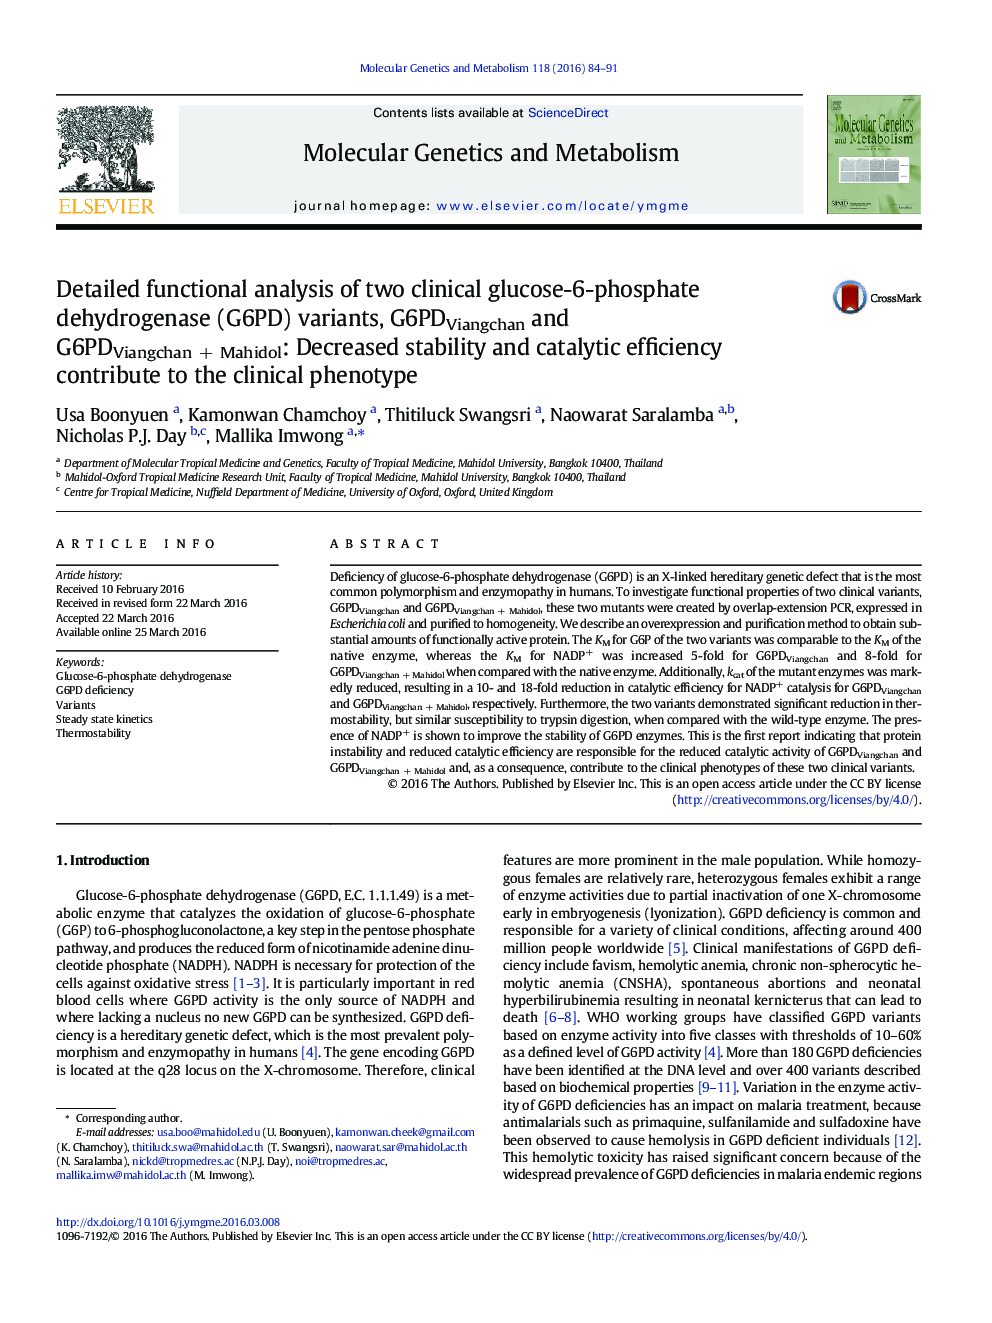 Detailed functional analysis of two clinical glucose-6-phosphate dehydrogenase (G6PD) variants, G6PDViangchan and G6PDViangchanÂ +Â Mahidol: Decreased stability and catalytic efficiency contribute to the clinical phenotype